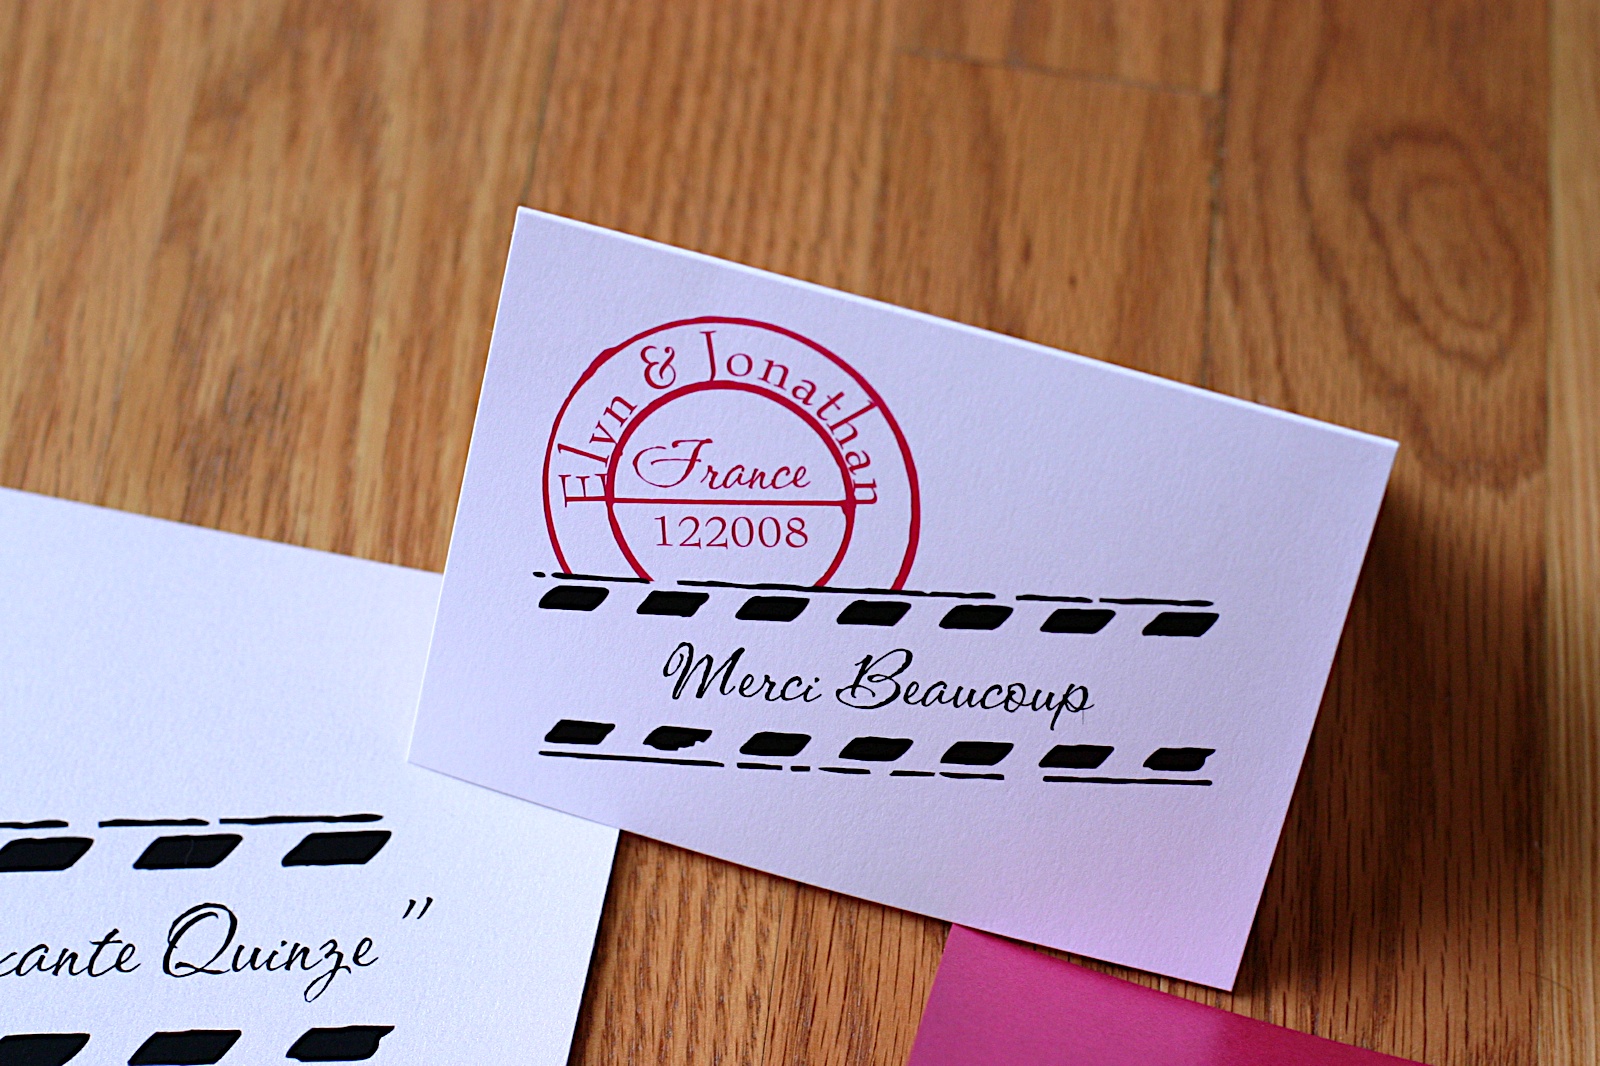 Elyn 39s invitations are one of my favorite 39s with the fun Eiffel Tower